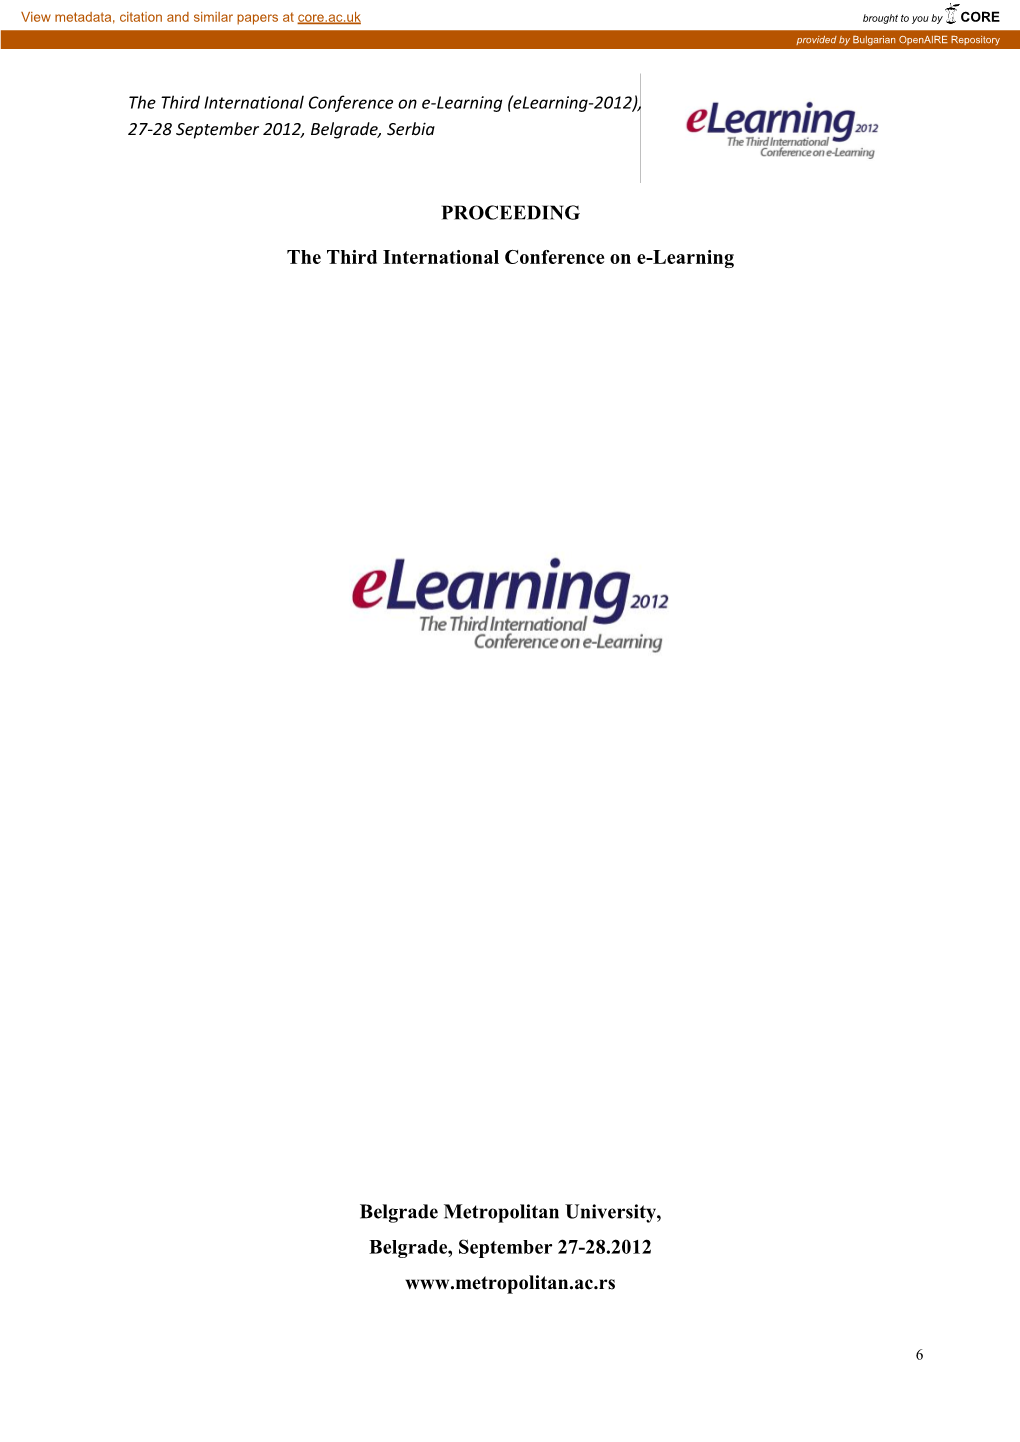 PROCEEDING the Third International Conference on E-Learning